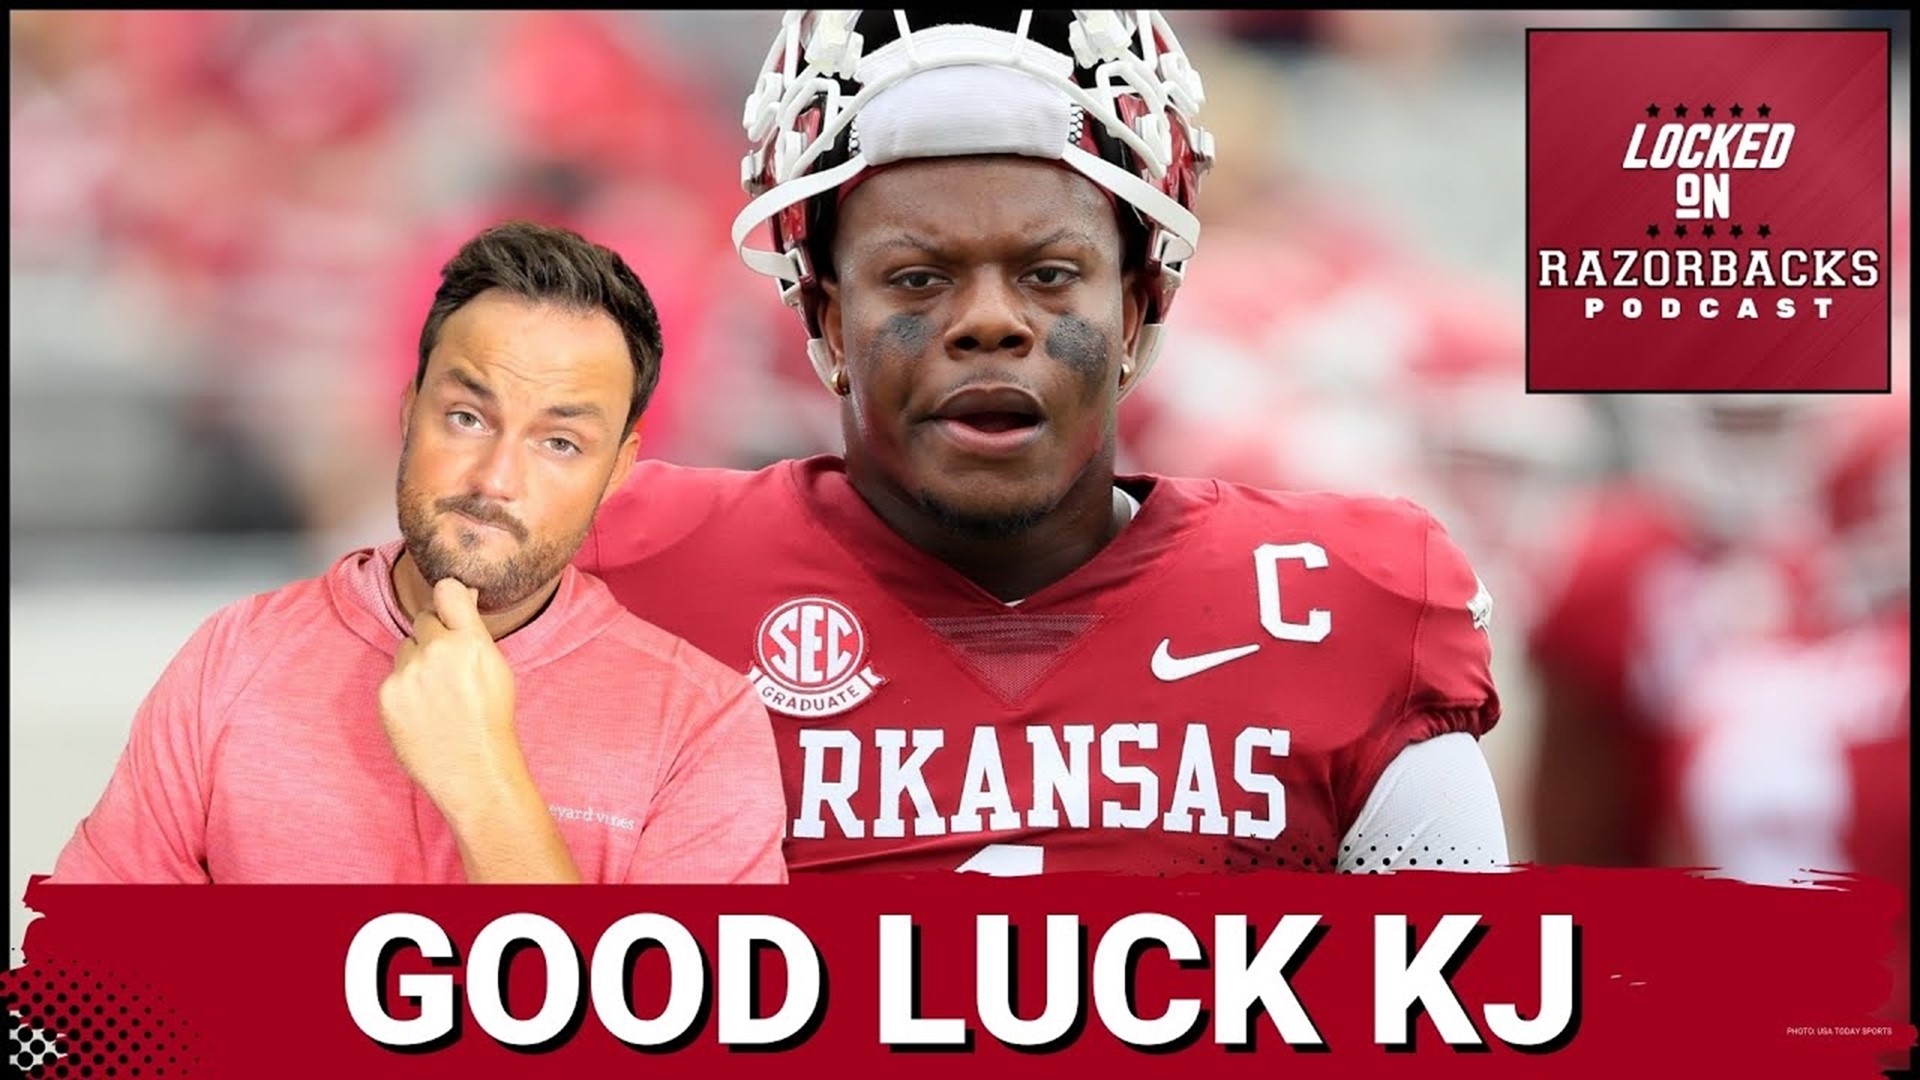 Razorback QB KJ Jefferson officially announced over the weekend that he is entering into the transfer portal. How will he be remembered among Arkansas fans?